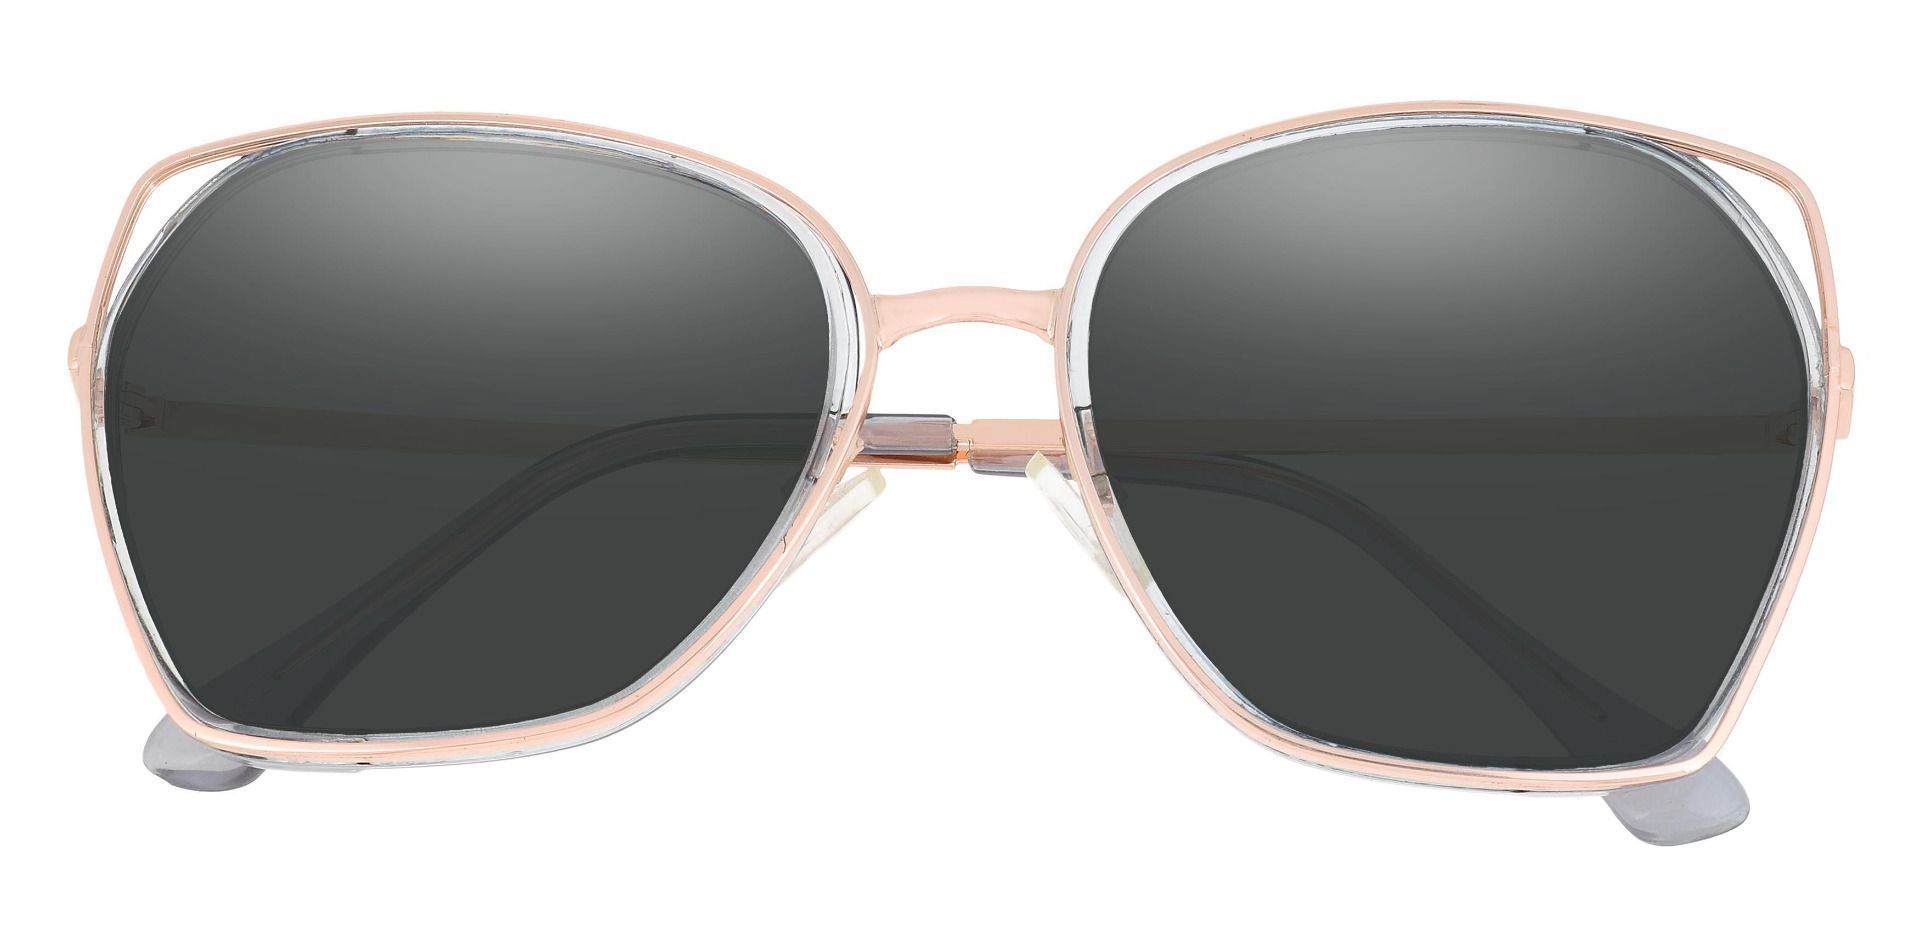 Tabby Geometric Non-Rx Sunglasses - Blue Frame With Gray Lenses